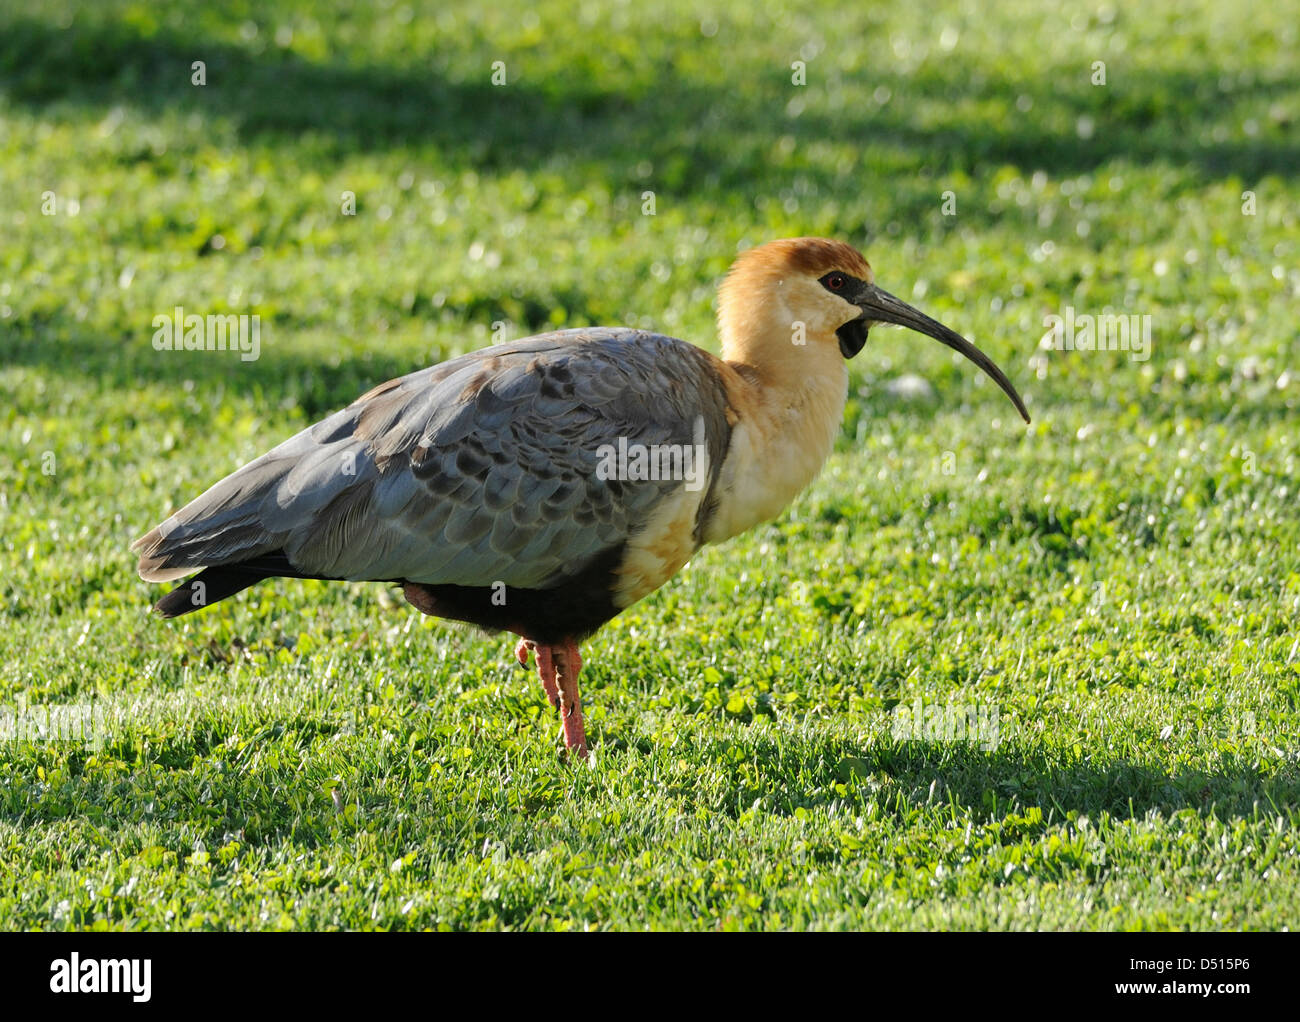 A Black faced Ibis (Theristicus melanopsis) looking for invertibrates in a freshly watered lawn. El Calafate, Argentina. Stock Photo